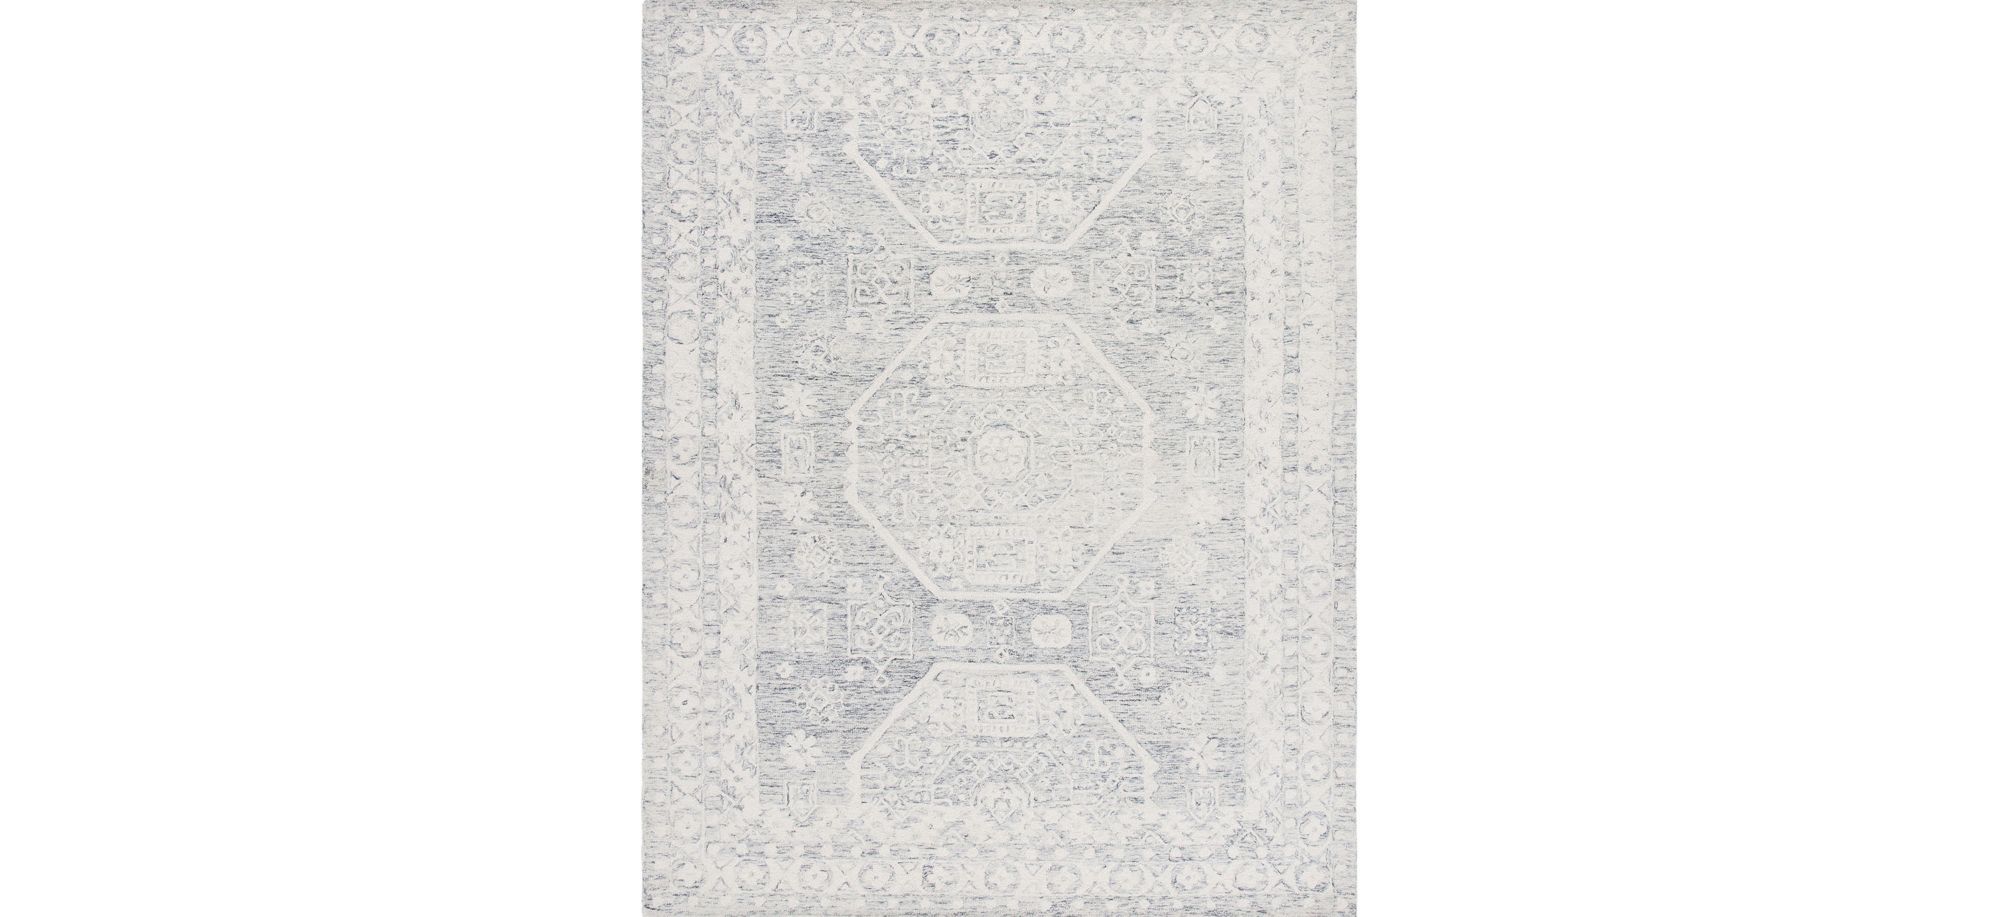 Fluffton Area Rug in Charcoal & Cream by Safavieh